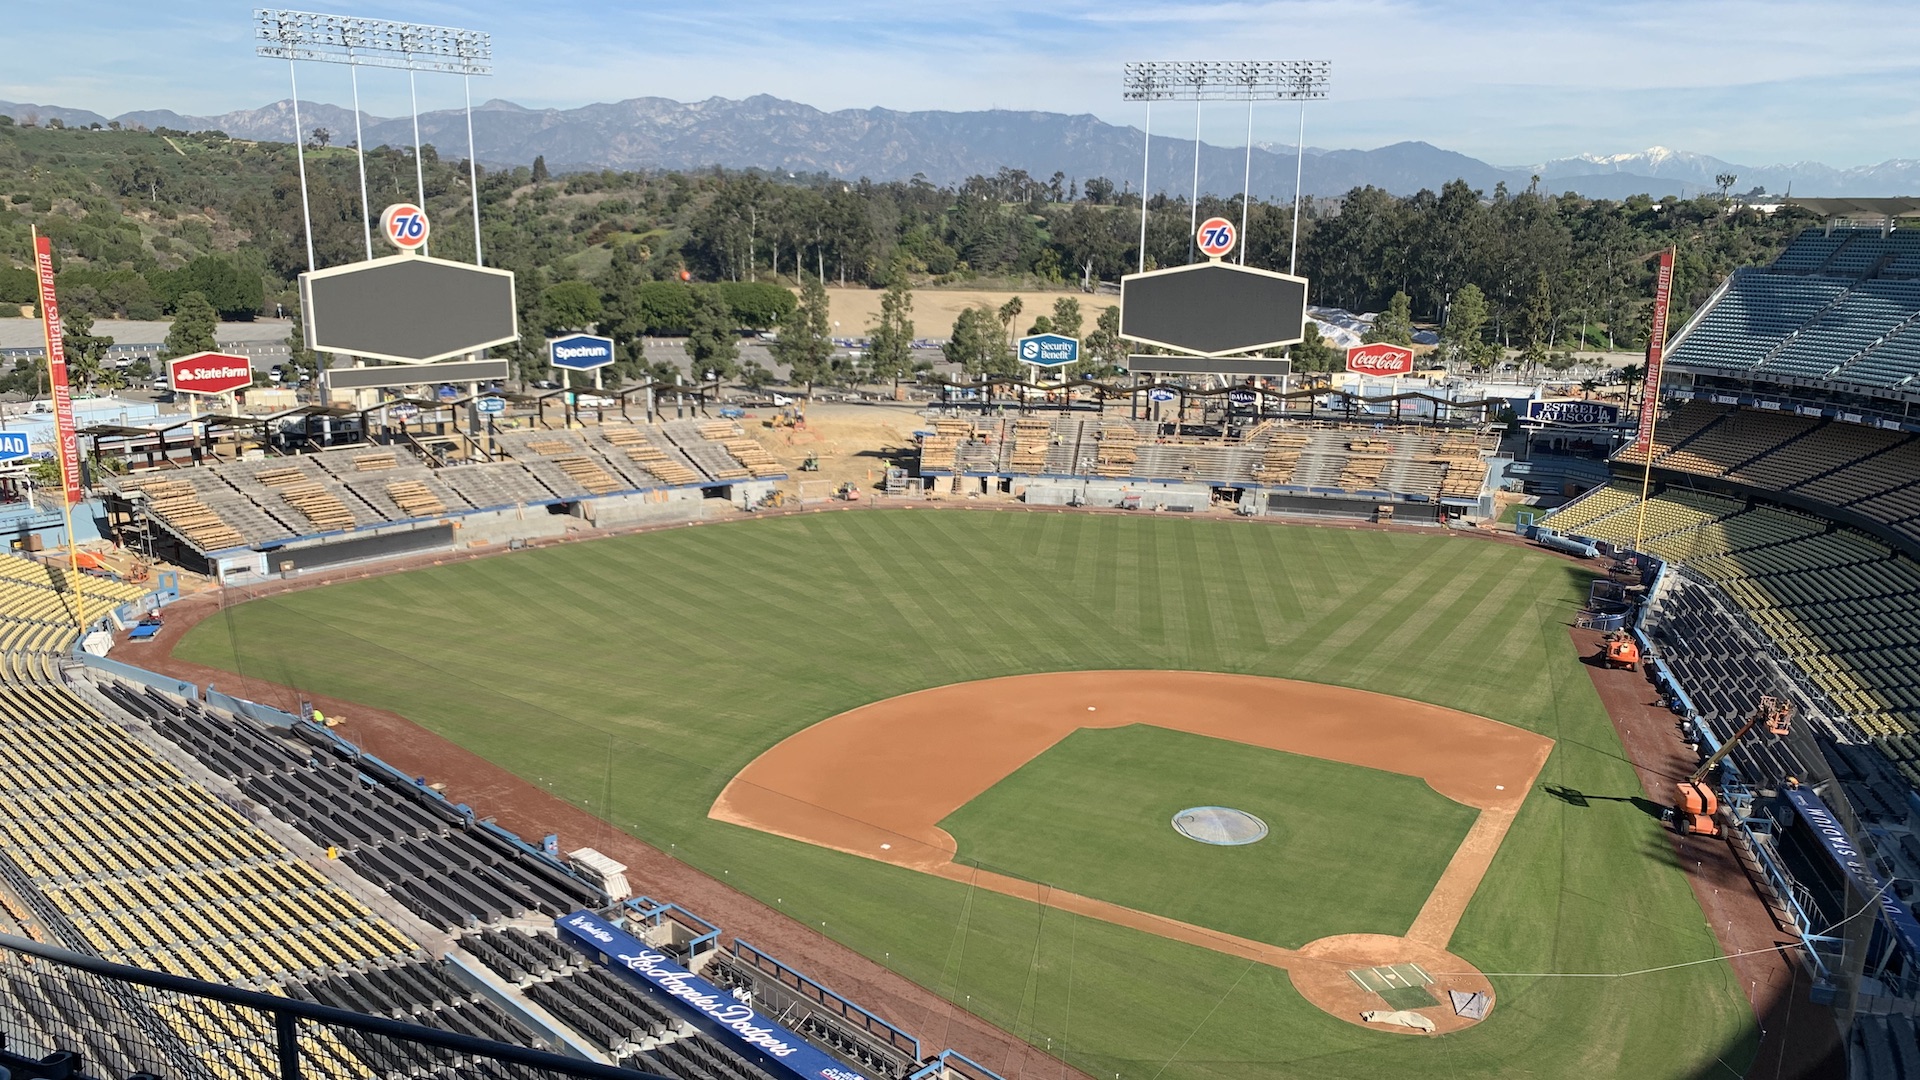 LA DODGERS: How to do a STADIUM TOUR and TIPS on attending a game! 